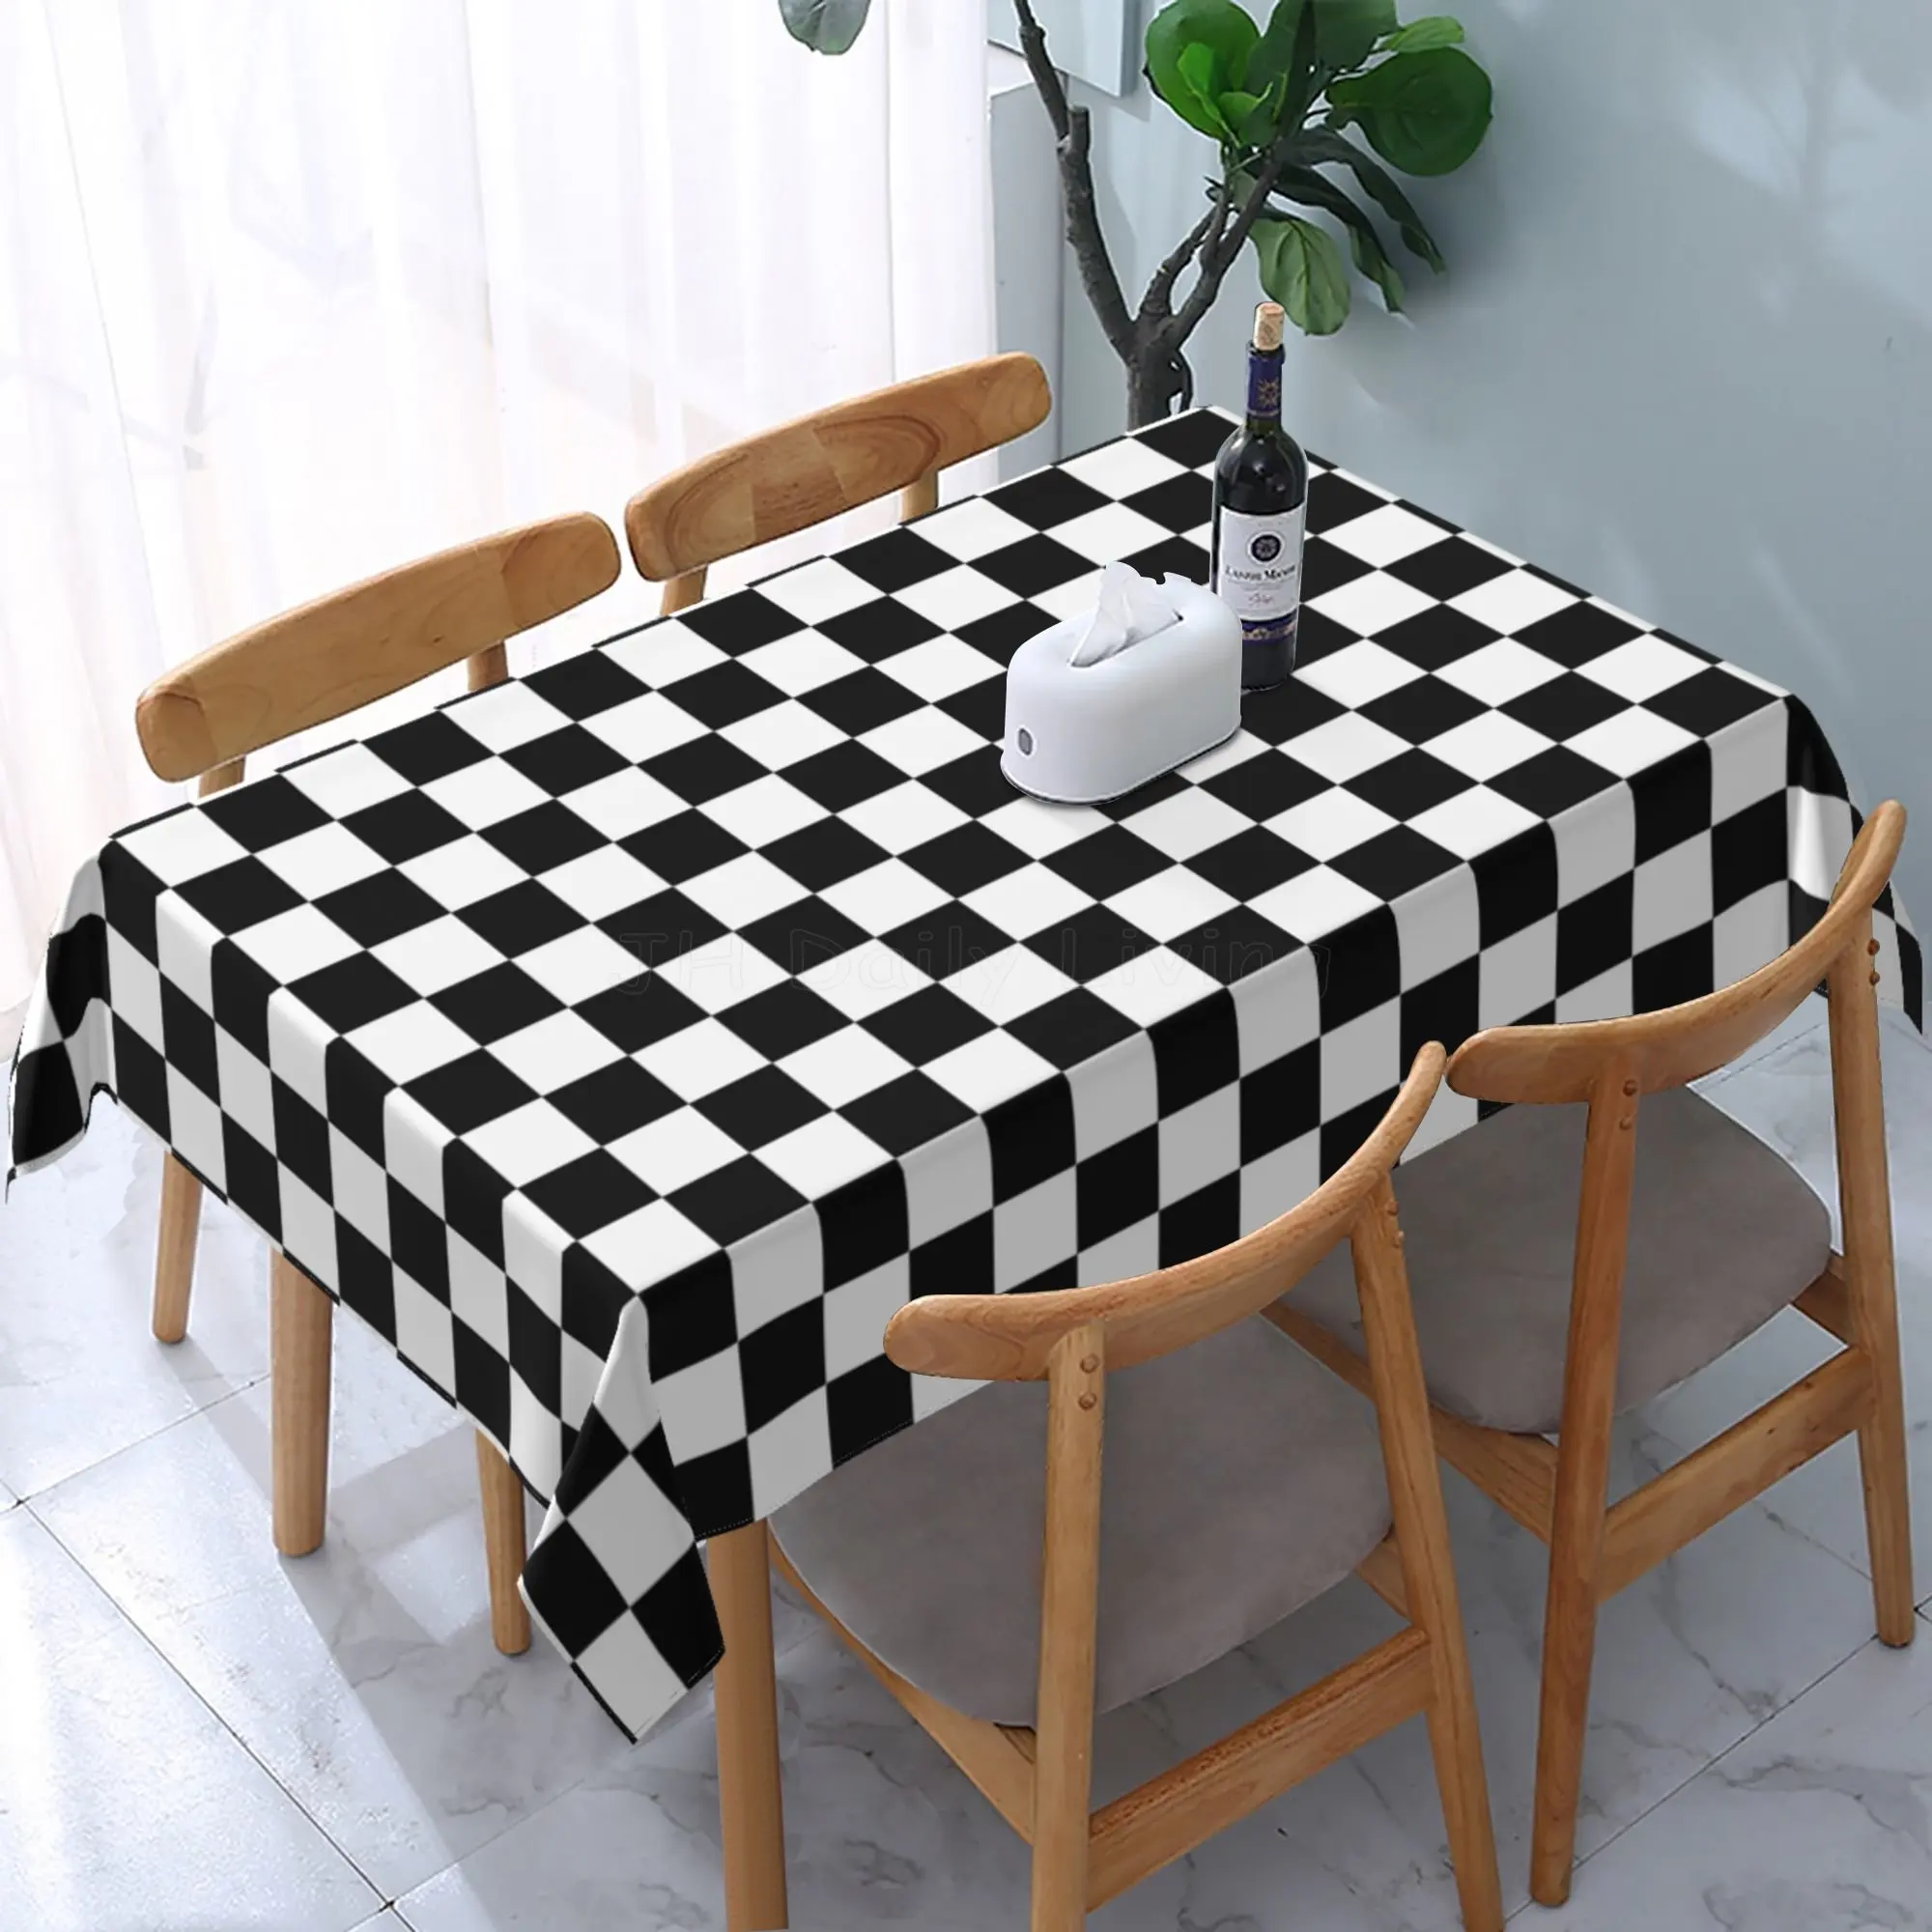 

Black White Racing Checkered Pattern Rectangular Table Cloth Table Cloths for Dining Table Coffee Table Cover Decor for Party